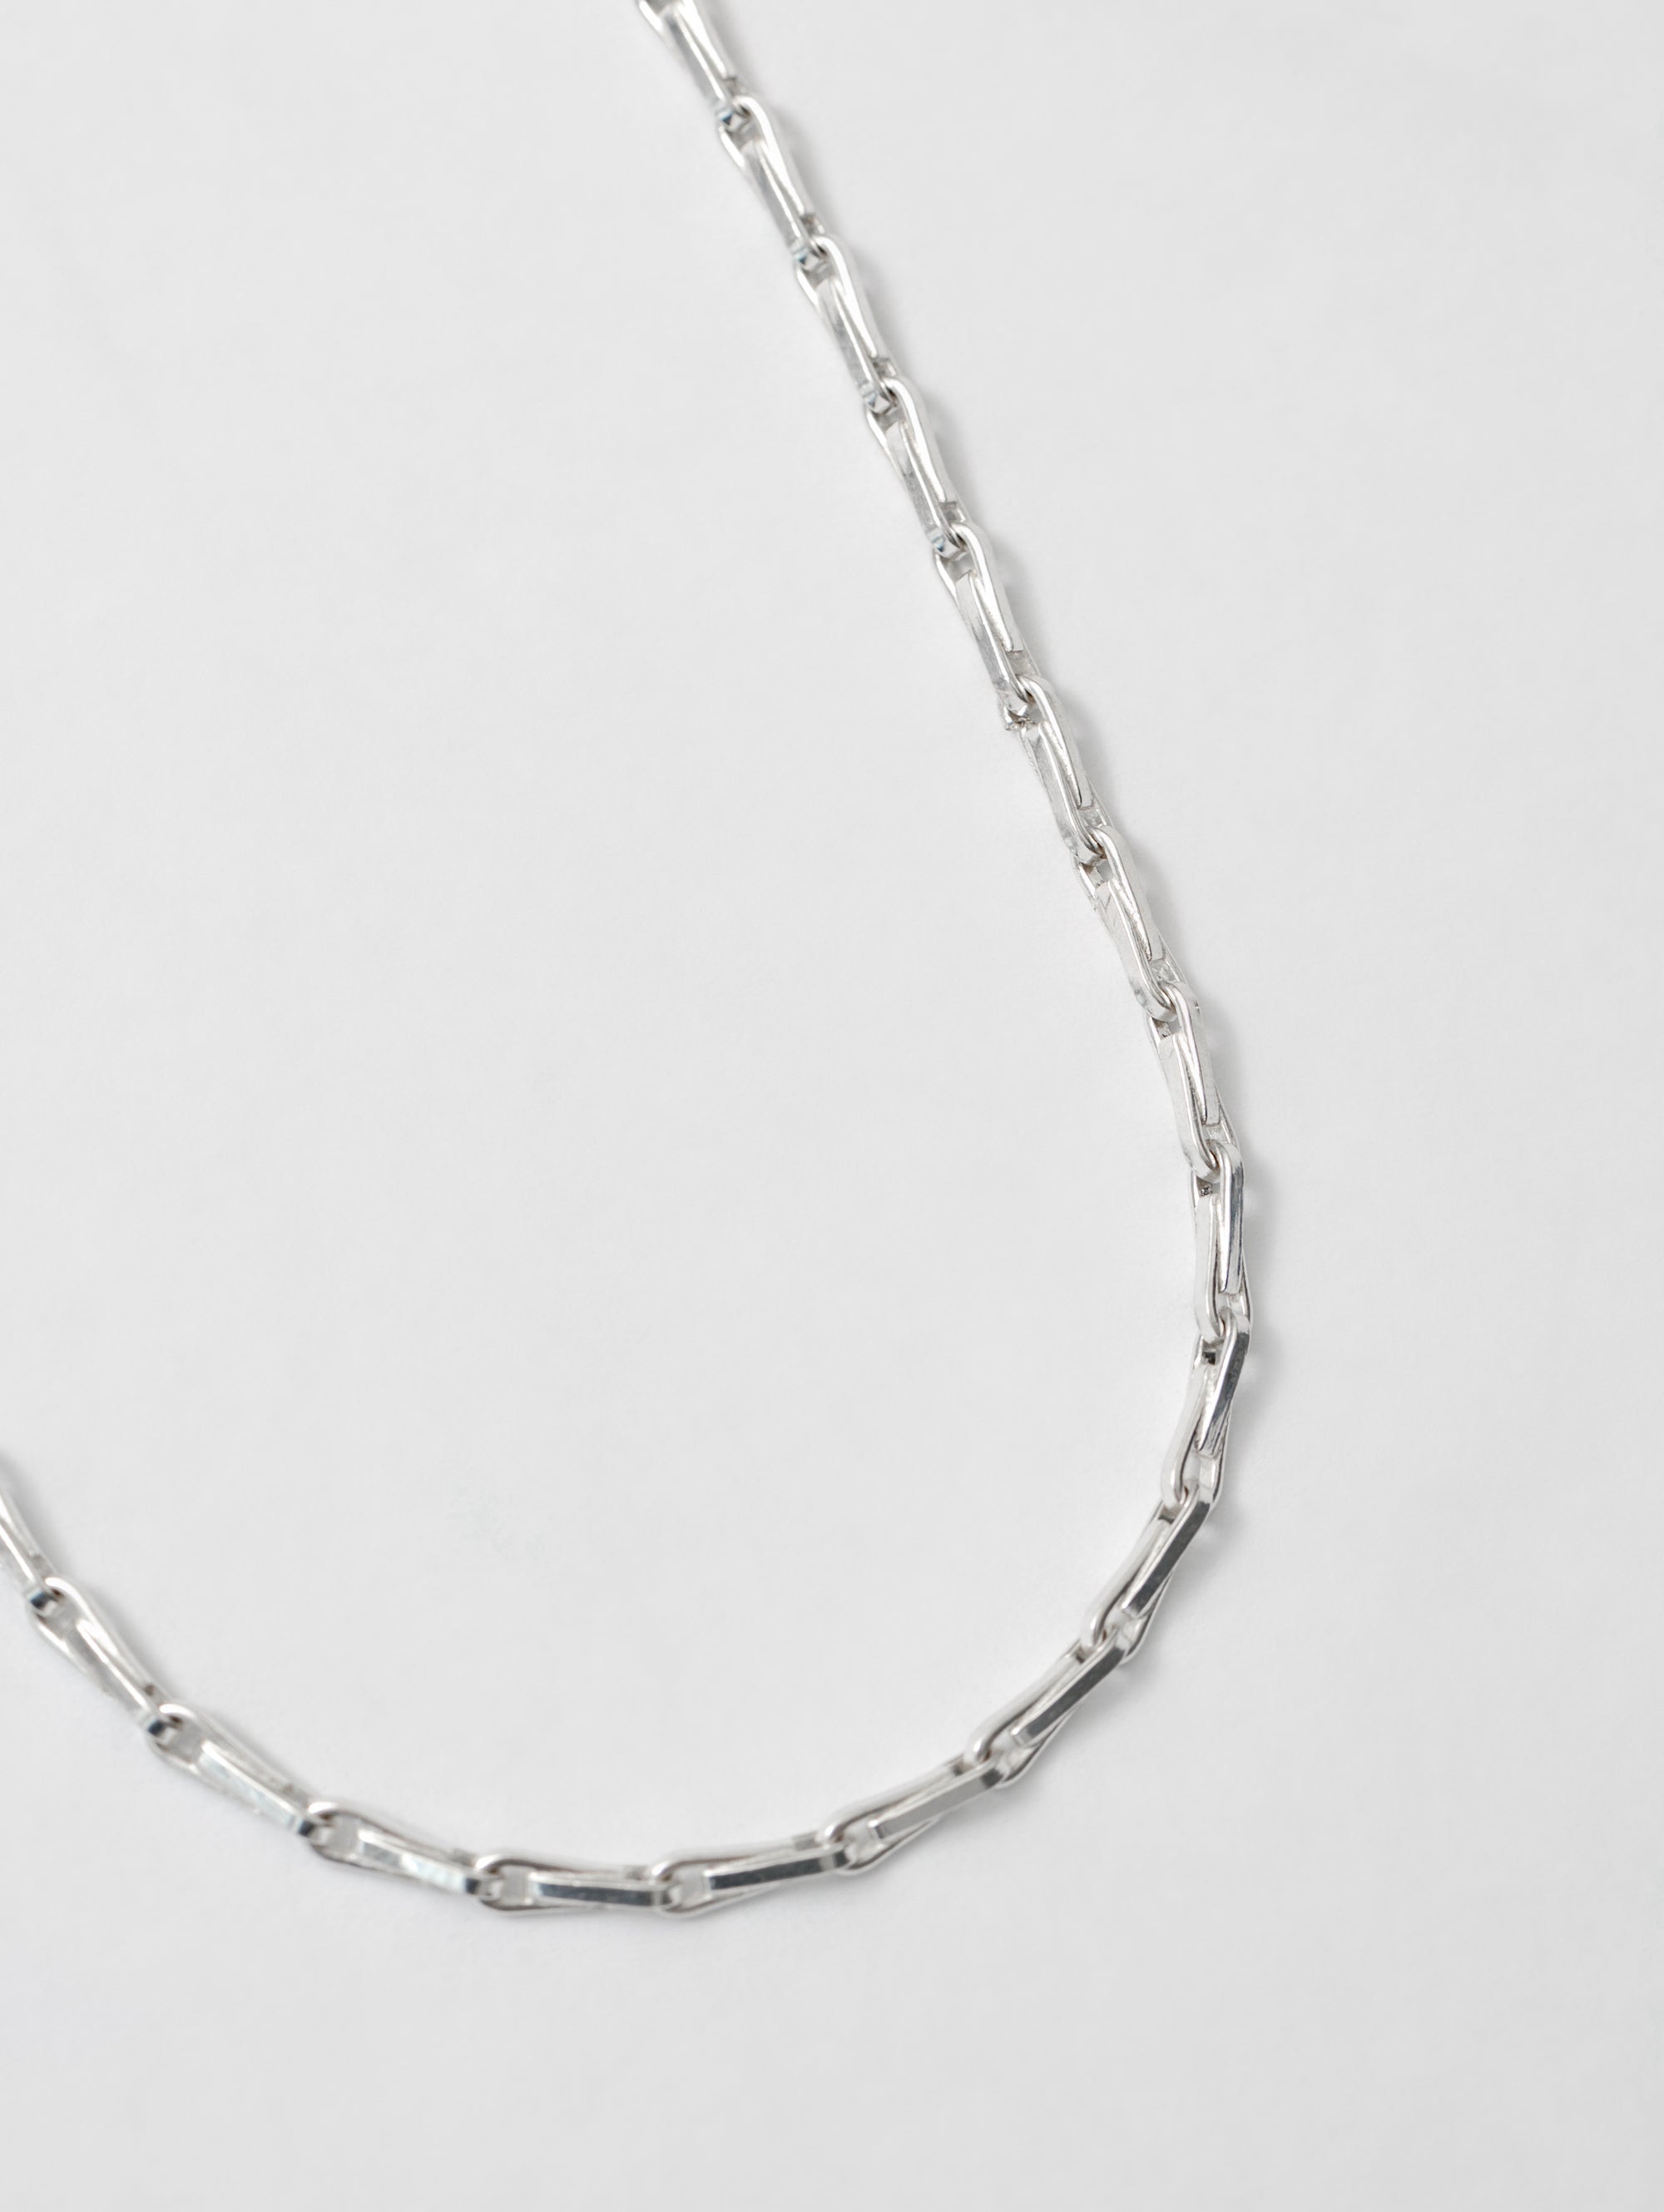 Wolf Circus Unique Unisex Chain Link Layering Necklace 925 Sterling Silver | Evan Necklace in Sterling Silver